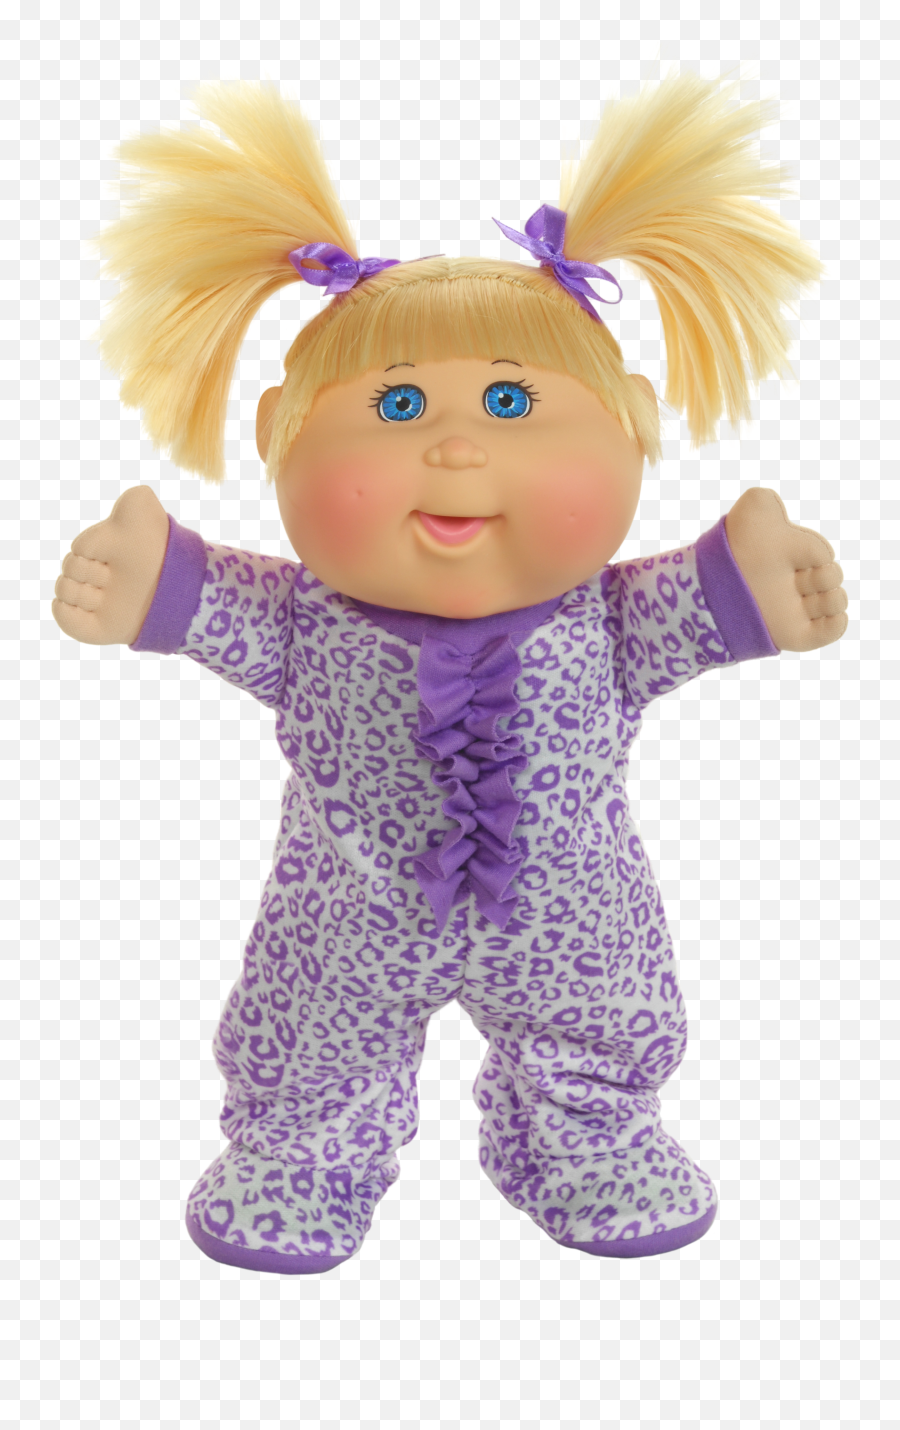 Blonde Girl Png - Dancing Cabbage Patch Doll Emoji,Cabbage Patch Kids Logo